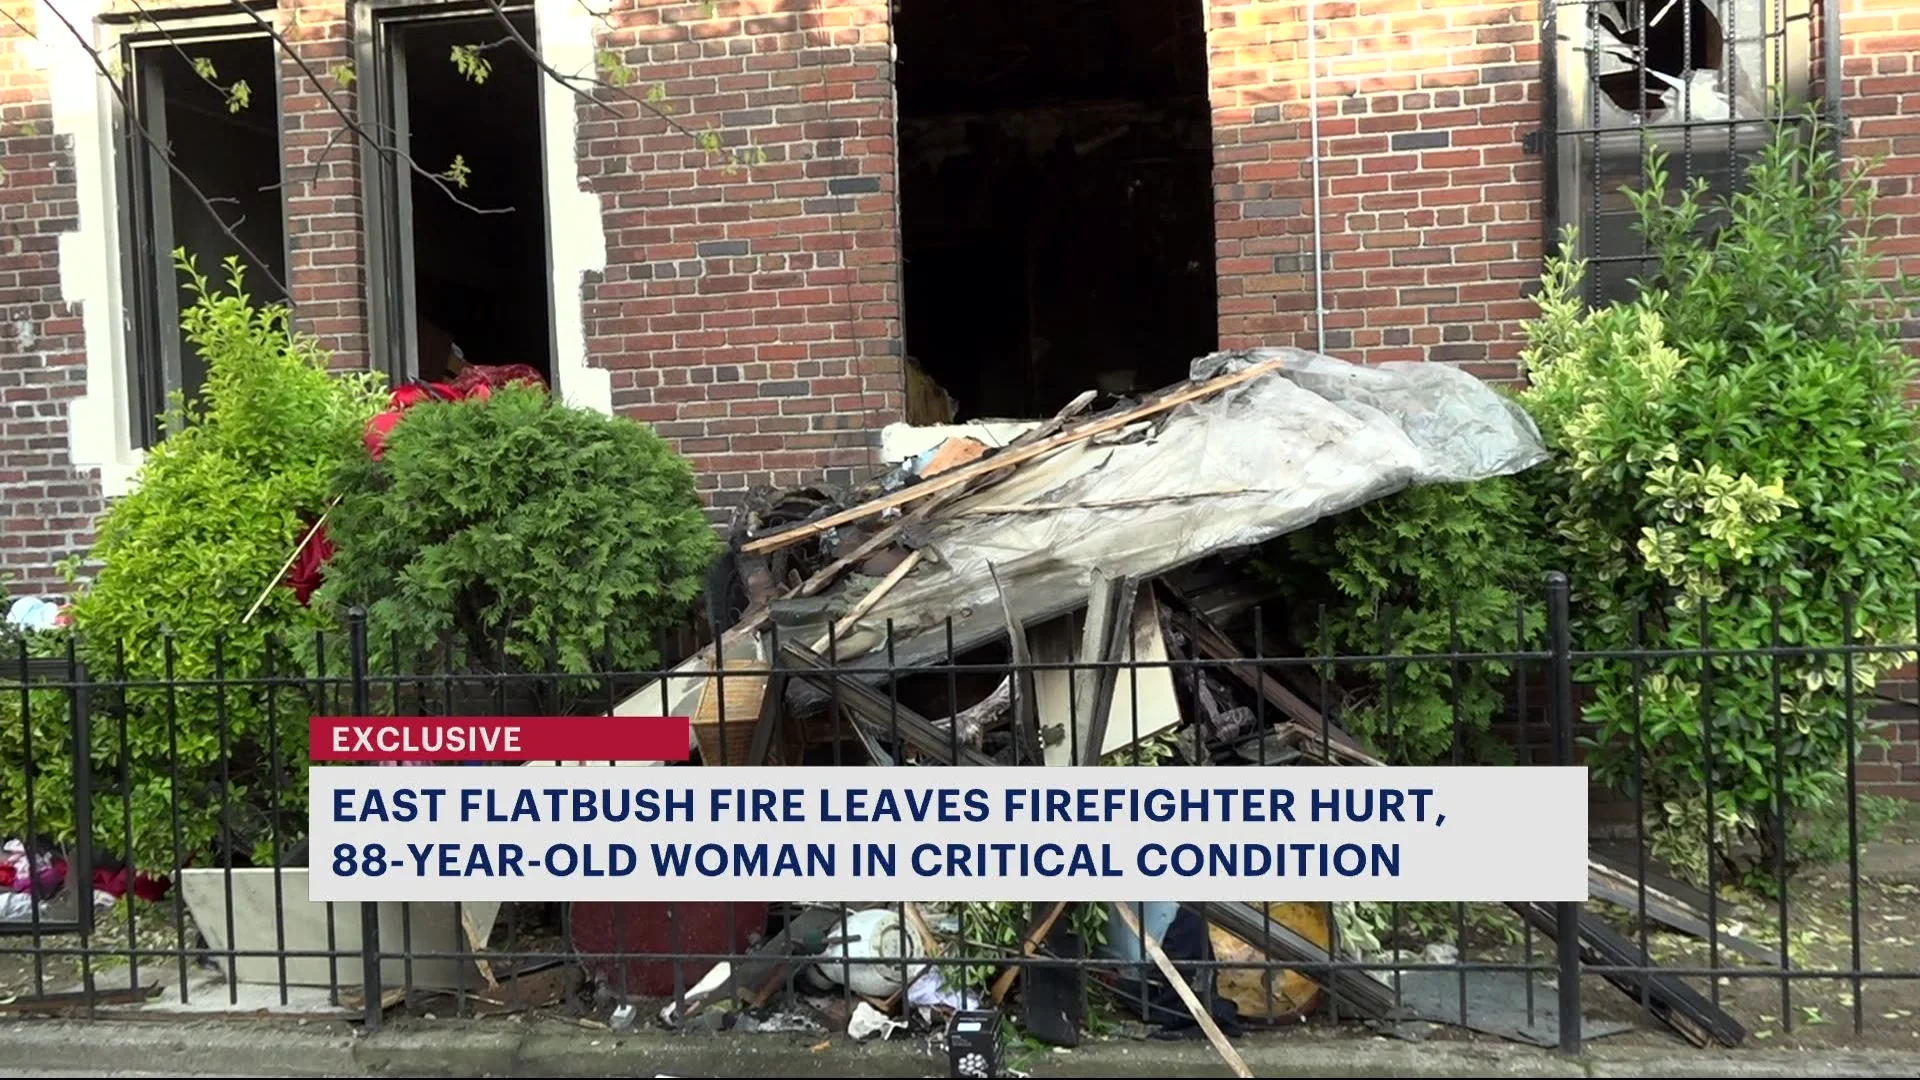 FDNY: 1 critical, firefighter injured in East Flatbush apartment fire